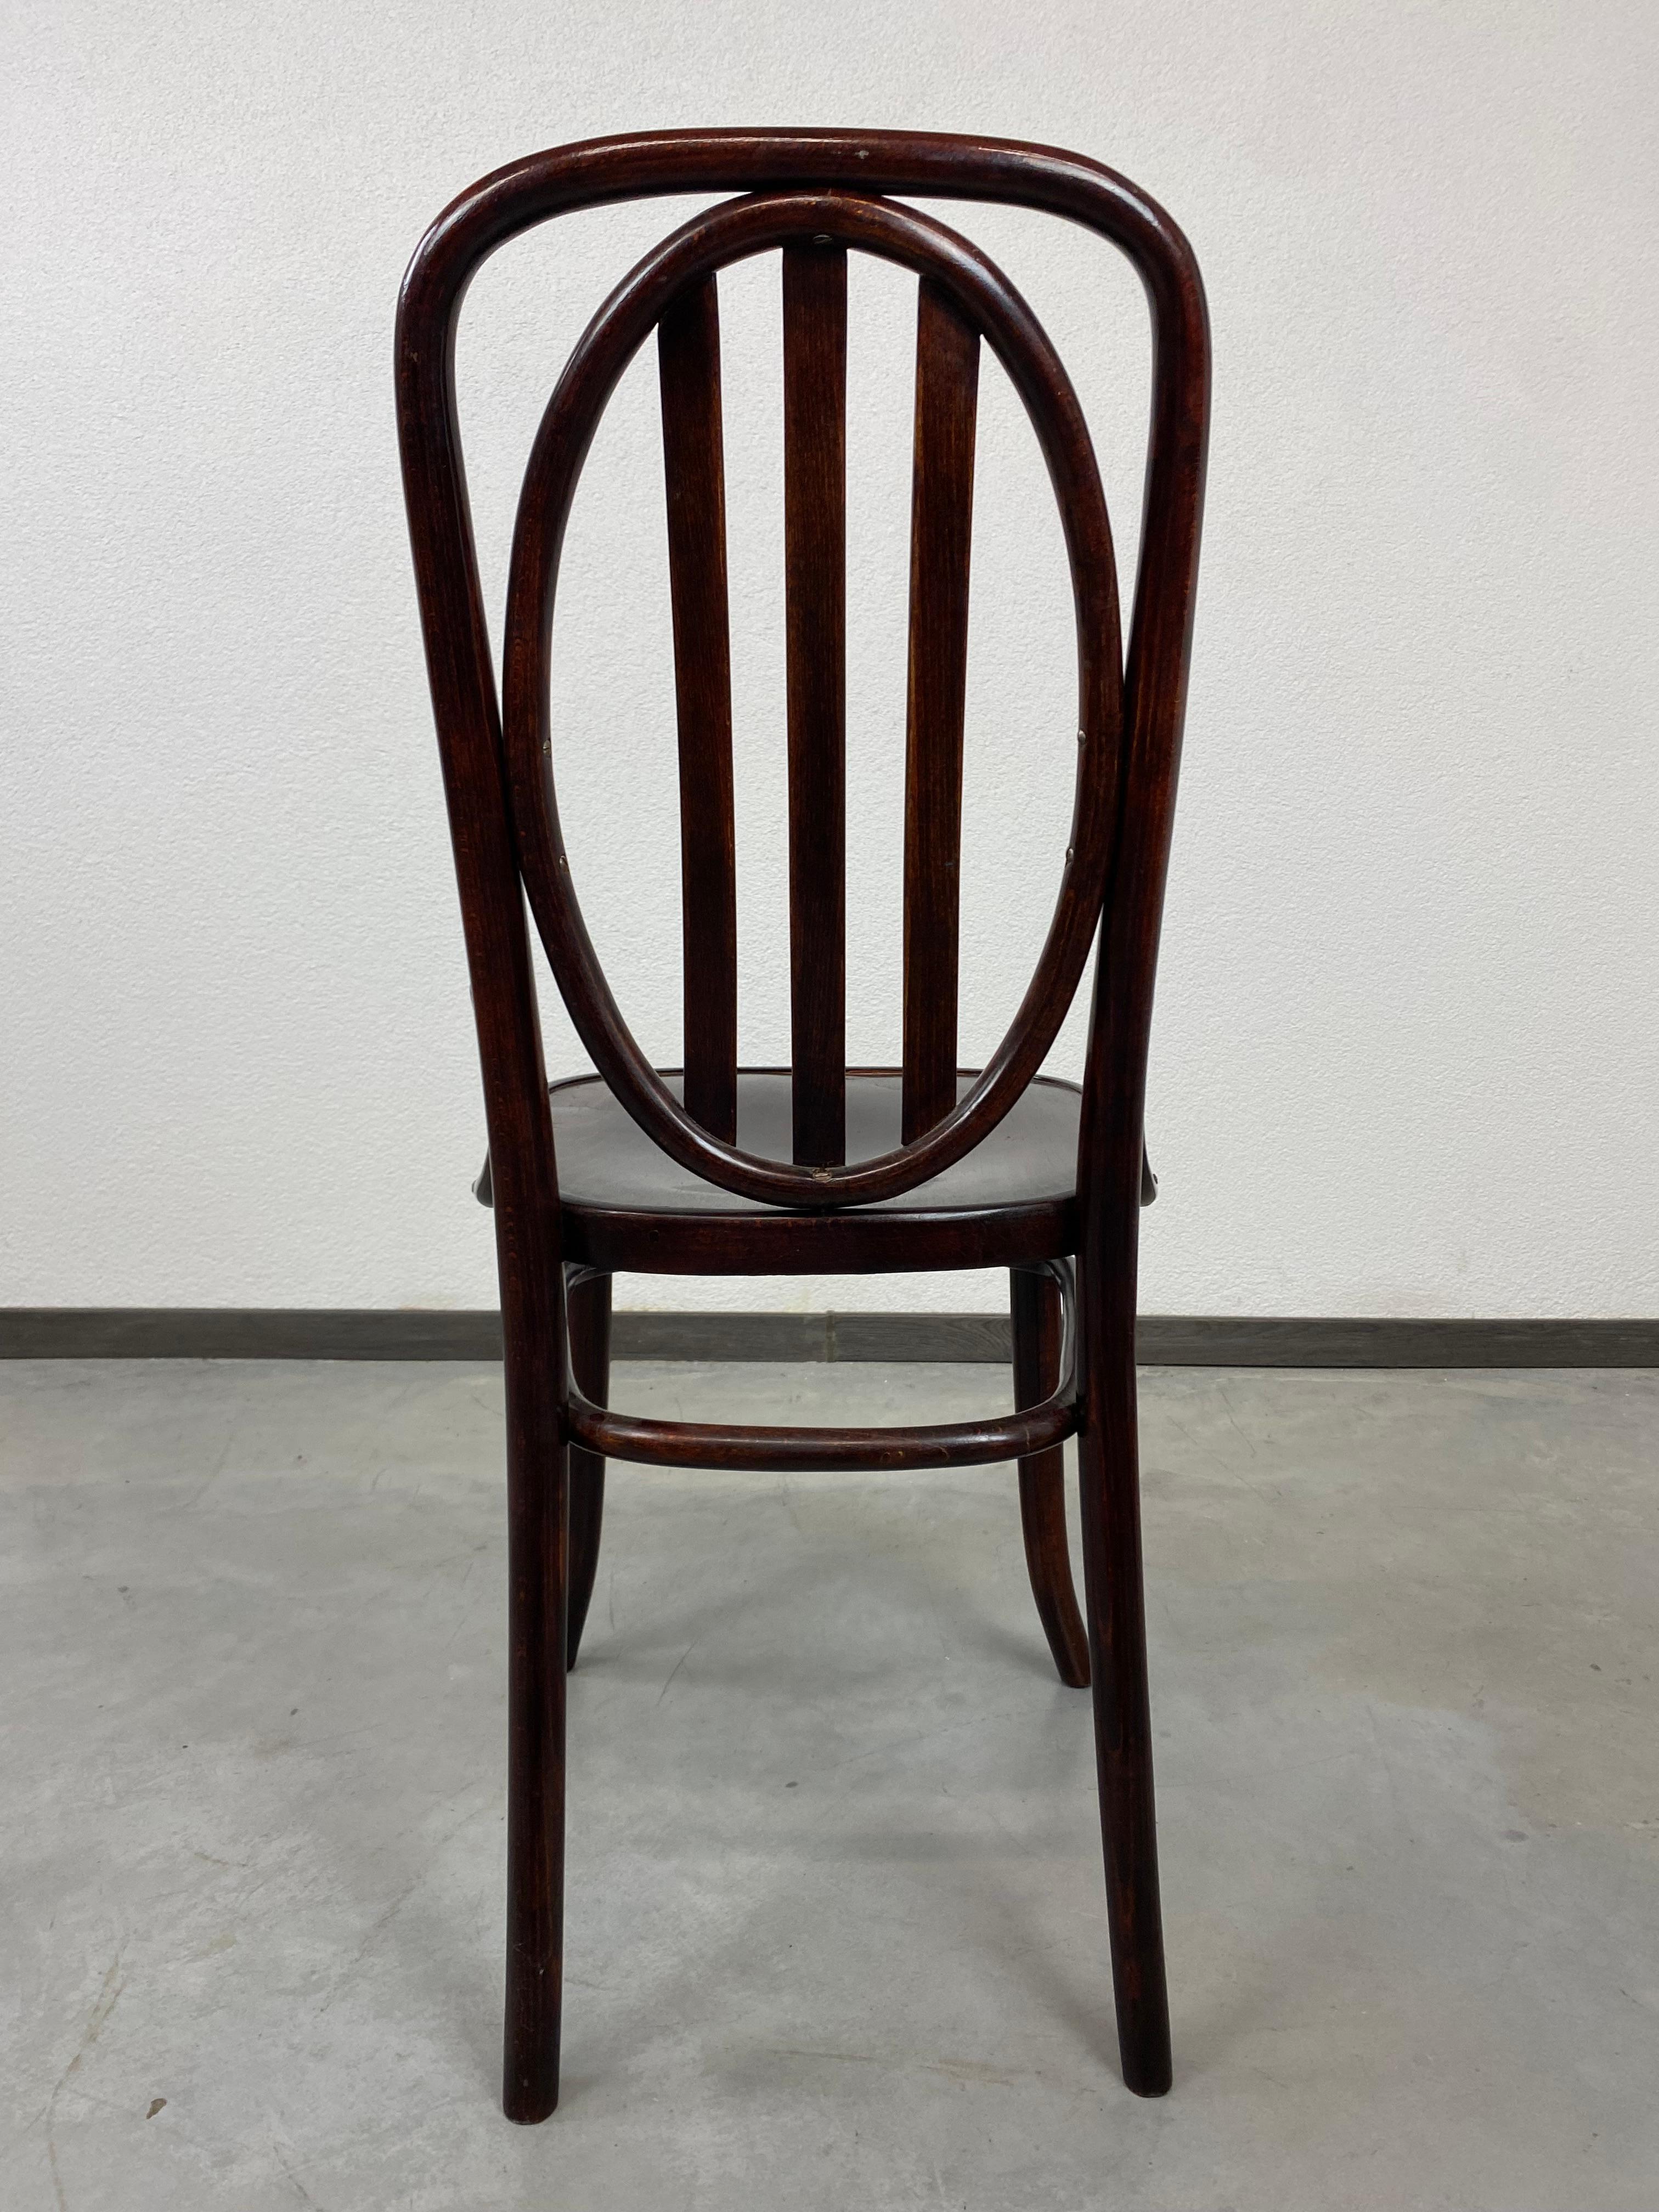 Early 20th Century Art Nouveau Thonet Chair For Sale